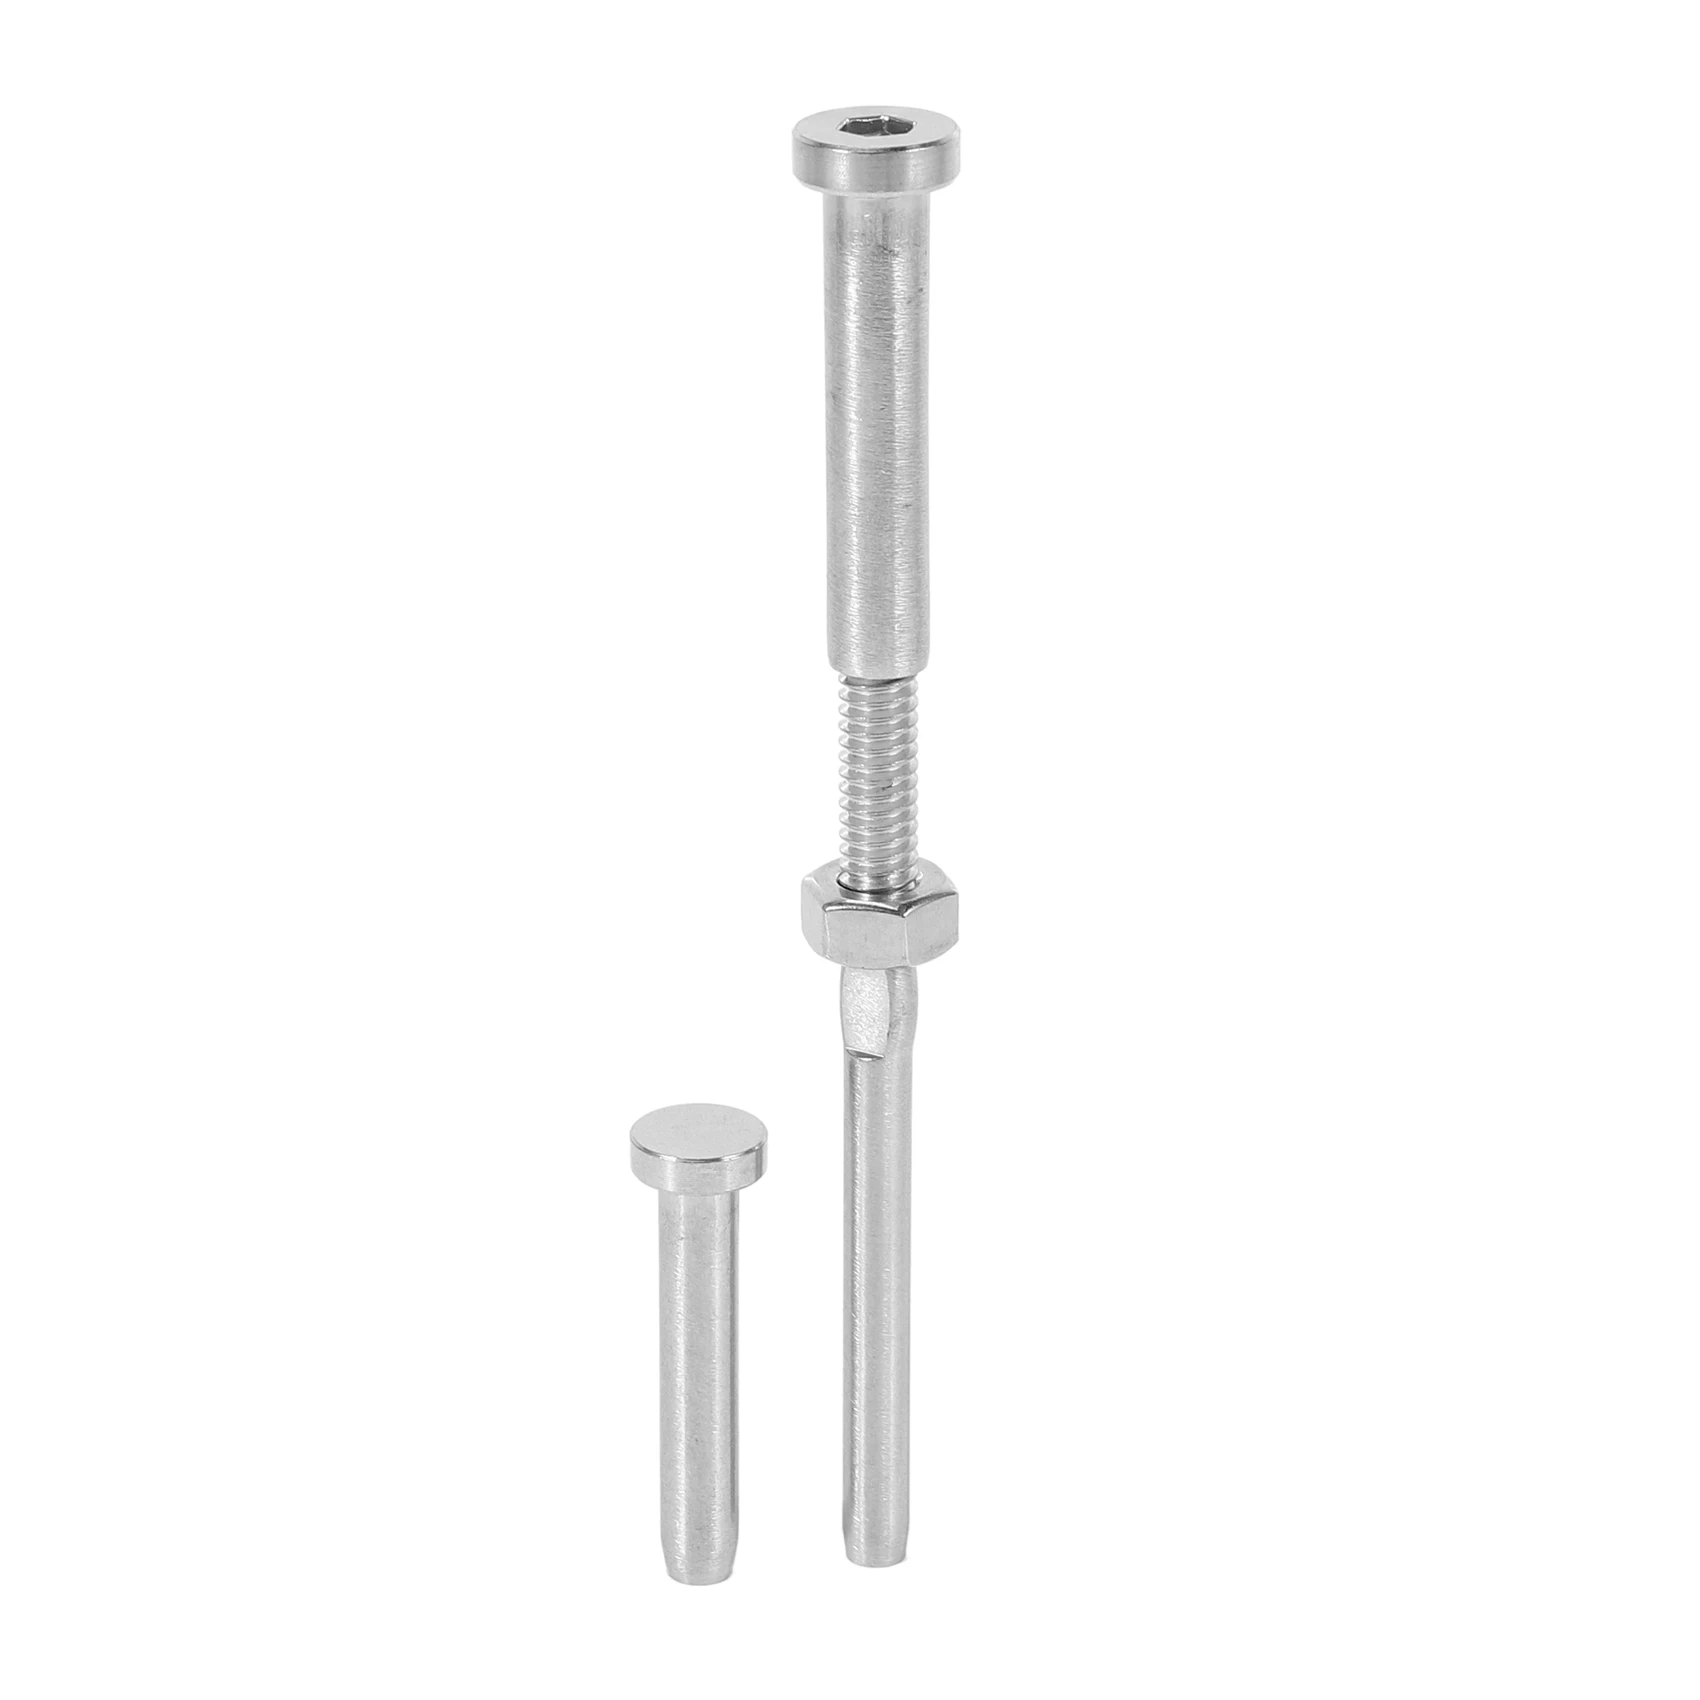 Stemball Swage and Invisible Hex Head Threaded Stud Tension End Fitting Terminal Combination Pack for 1/8 Inch Cable Railing